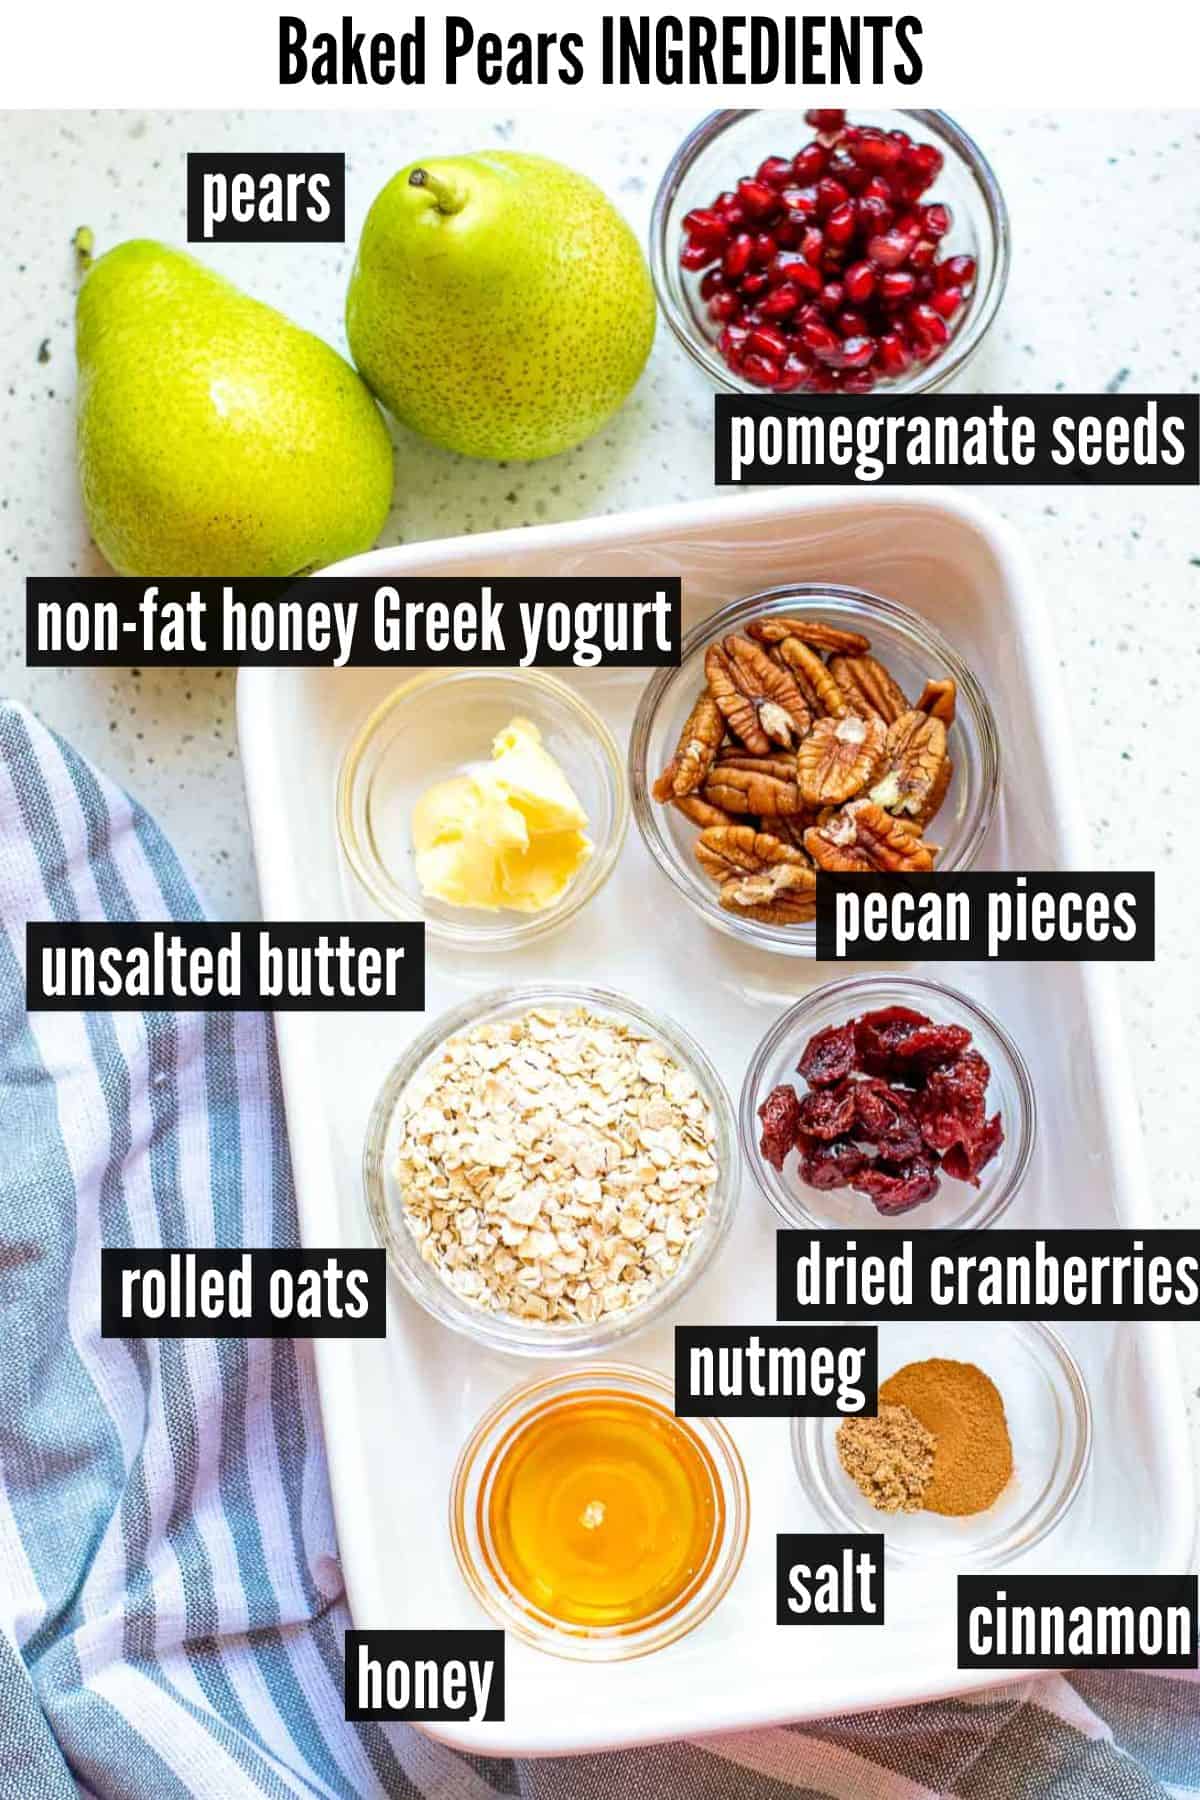 baked pears labelled ingredients.